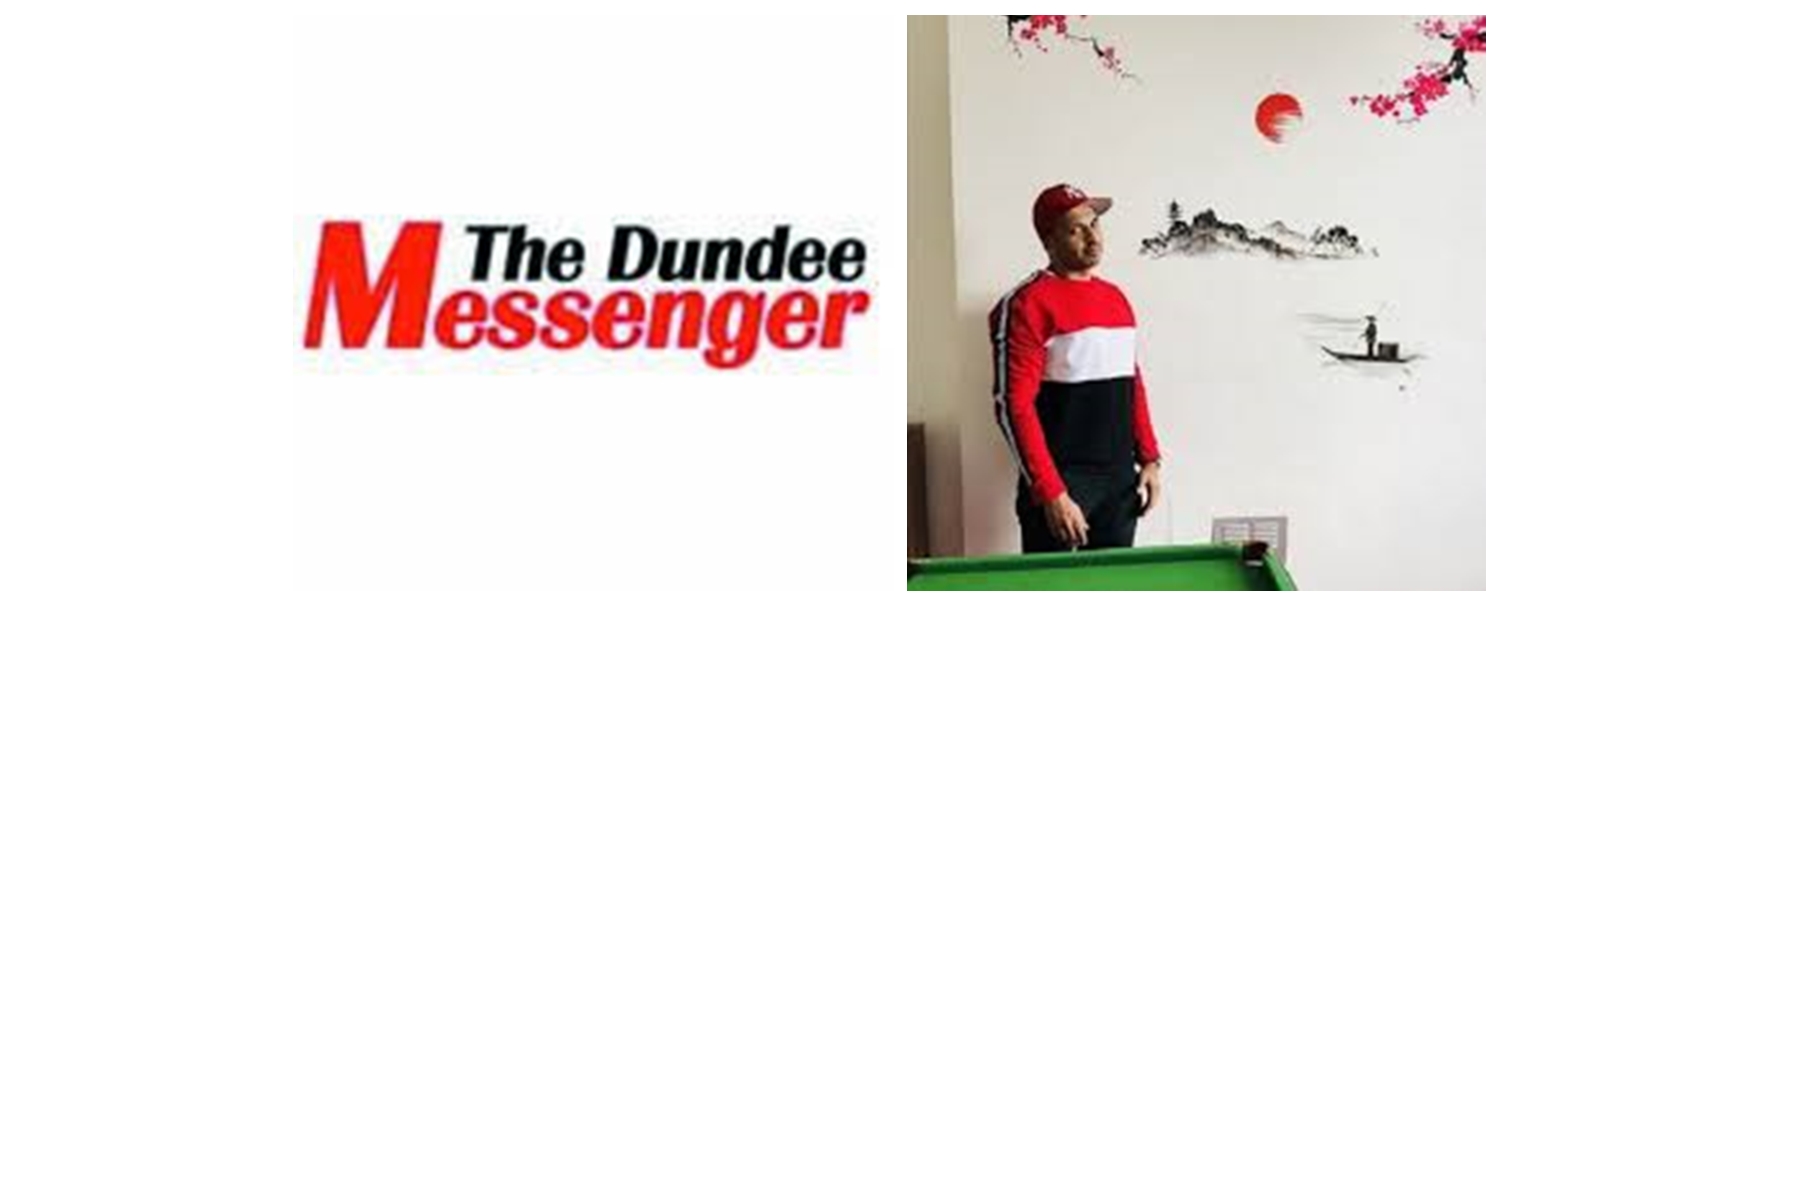 Thieving Plagiarising Scum At “The Dundee Messenger” Steal And Present BBC News/ Mona McAlinden’s Article About Addy Agame As Their Own (Written By William aka Weird Willy) “How Social Media Film Exposed….”